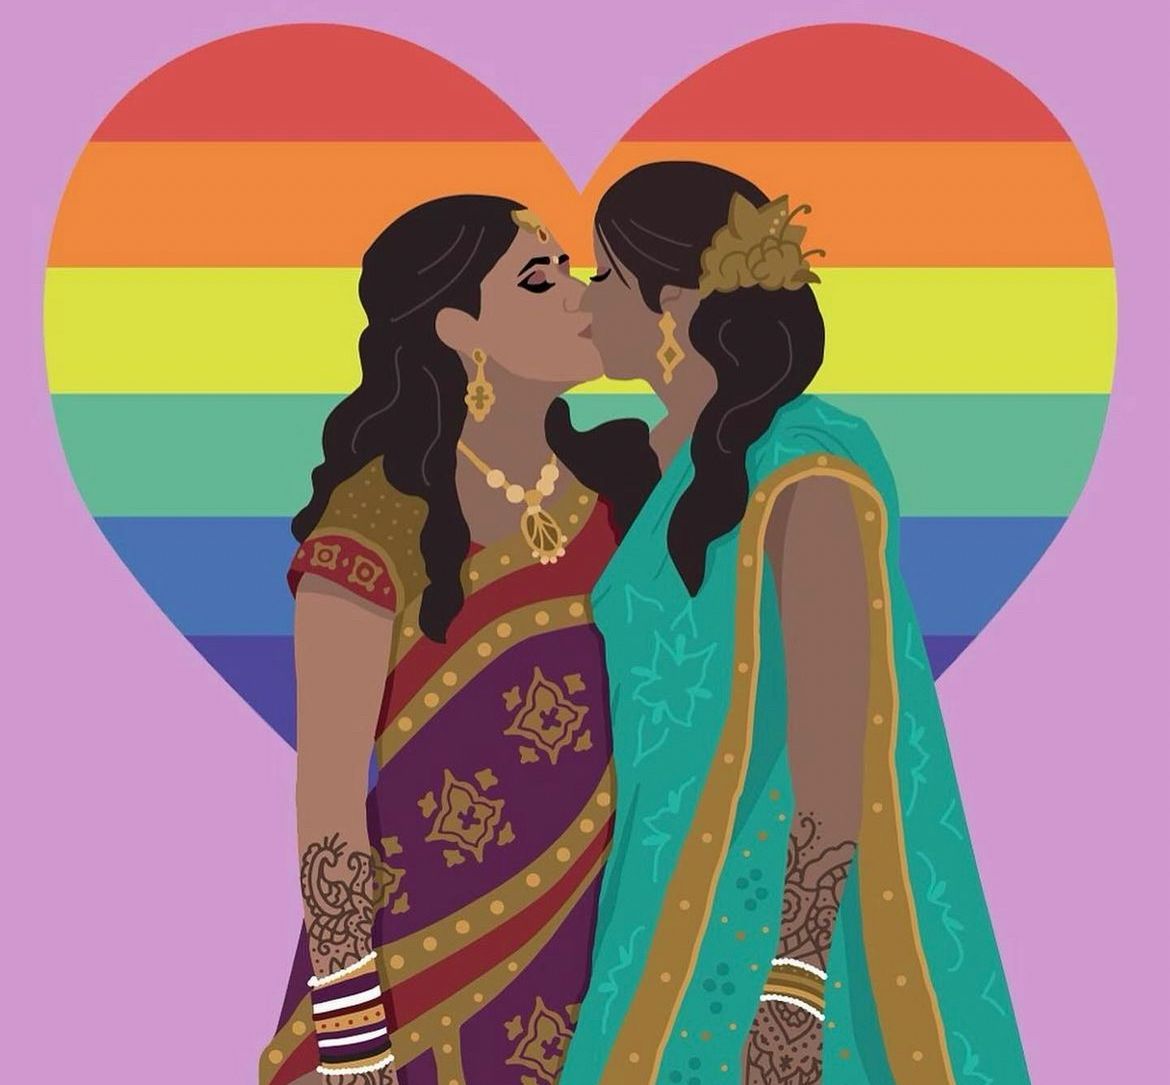 A very happy #LesbianVisibilityWeek We would like to celebrate our lesbian members, friends and allies. Coming together to recognise the diversity of lesbians and other LGBTQ+ women has never been more important to us and we are thankful for the enormous contribution that our